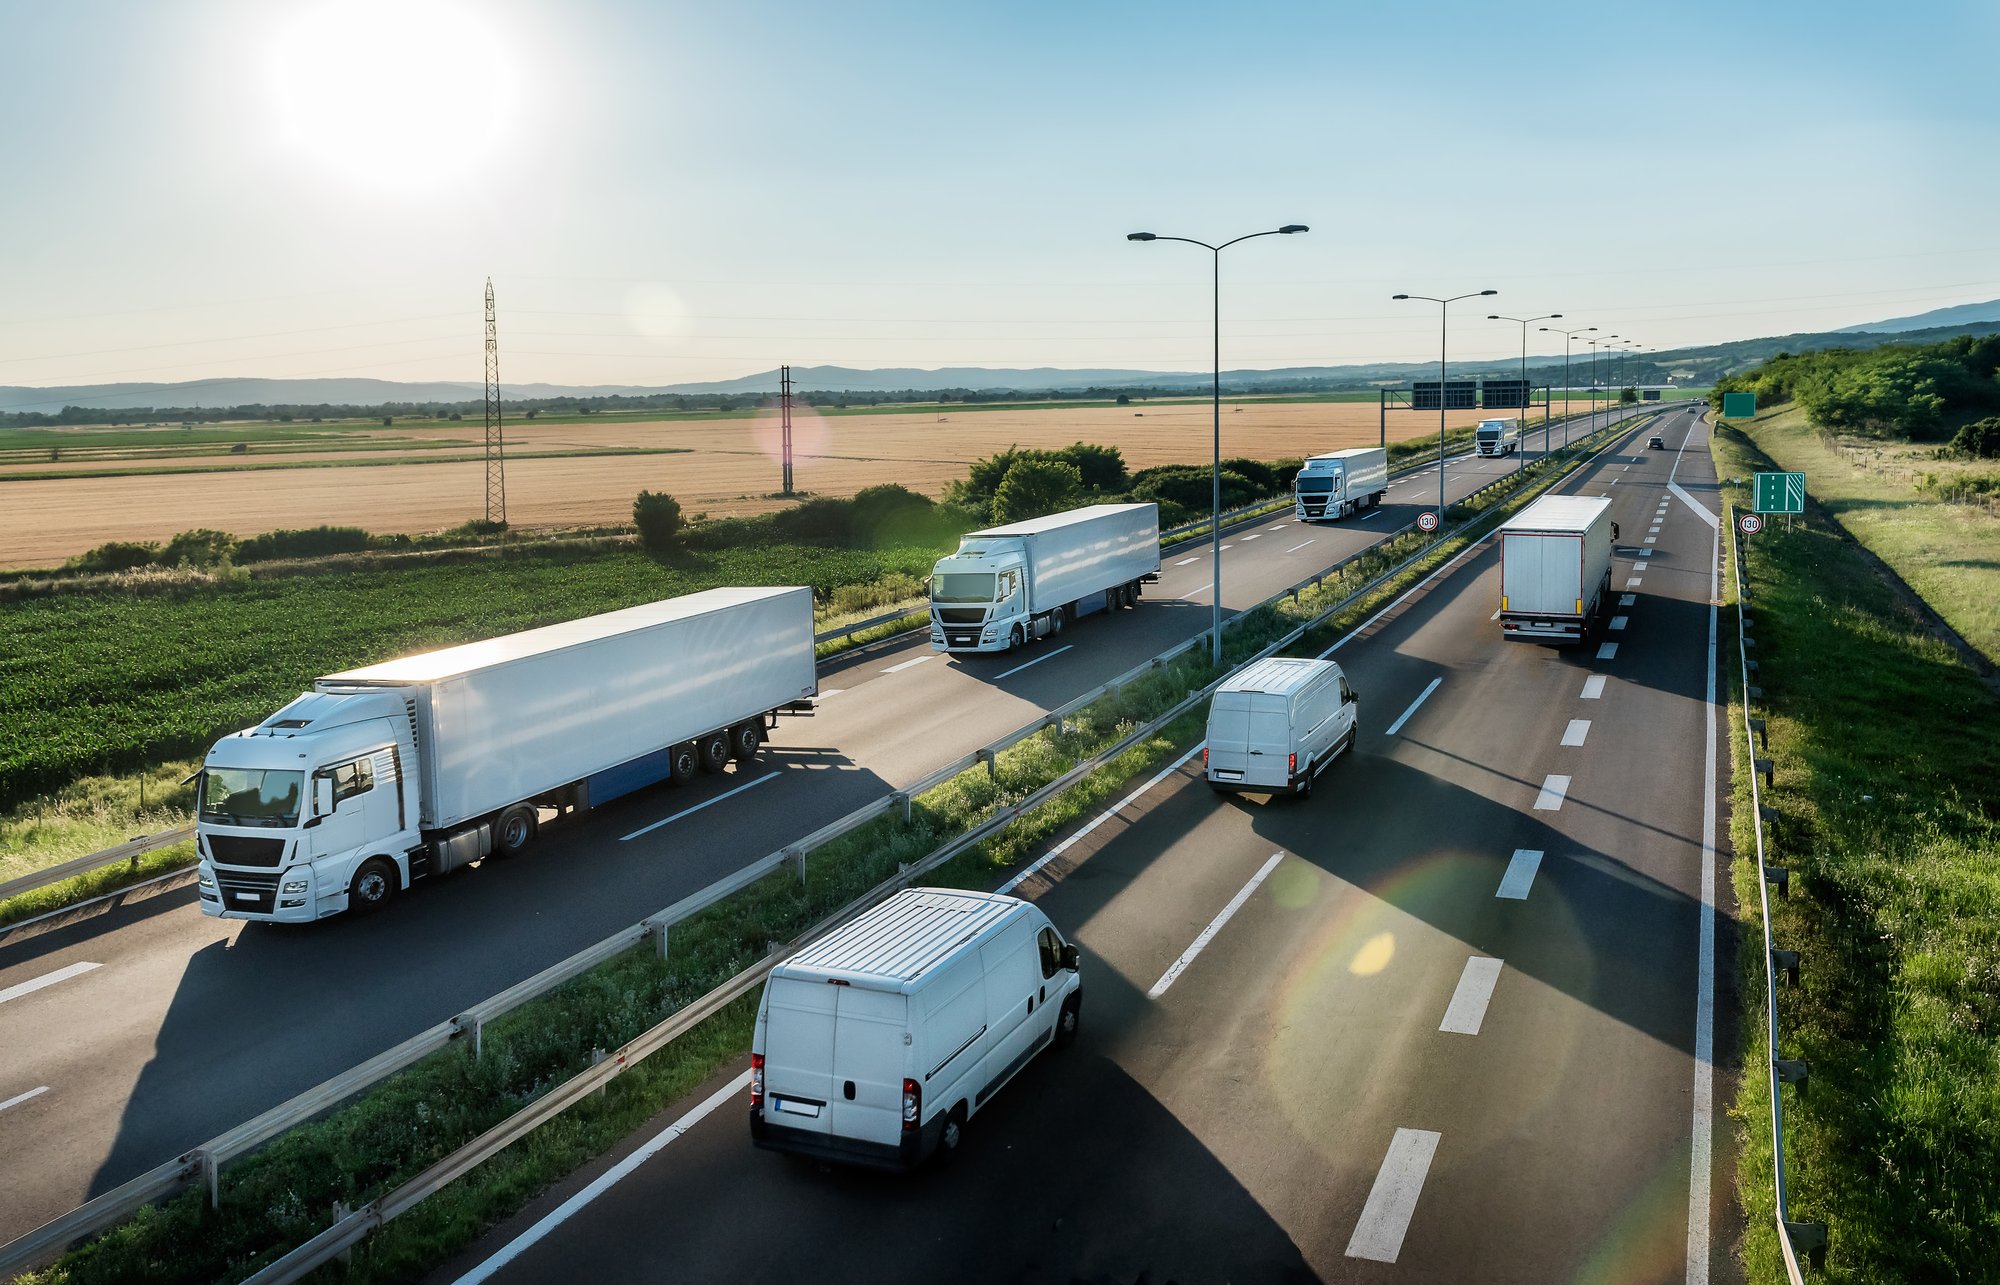 Image of vehicles on the highway, symbolizing GearTrack's ability to provide real-time monitoring and alerts of fleet vehicles.